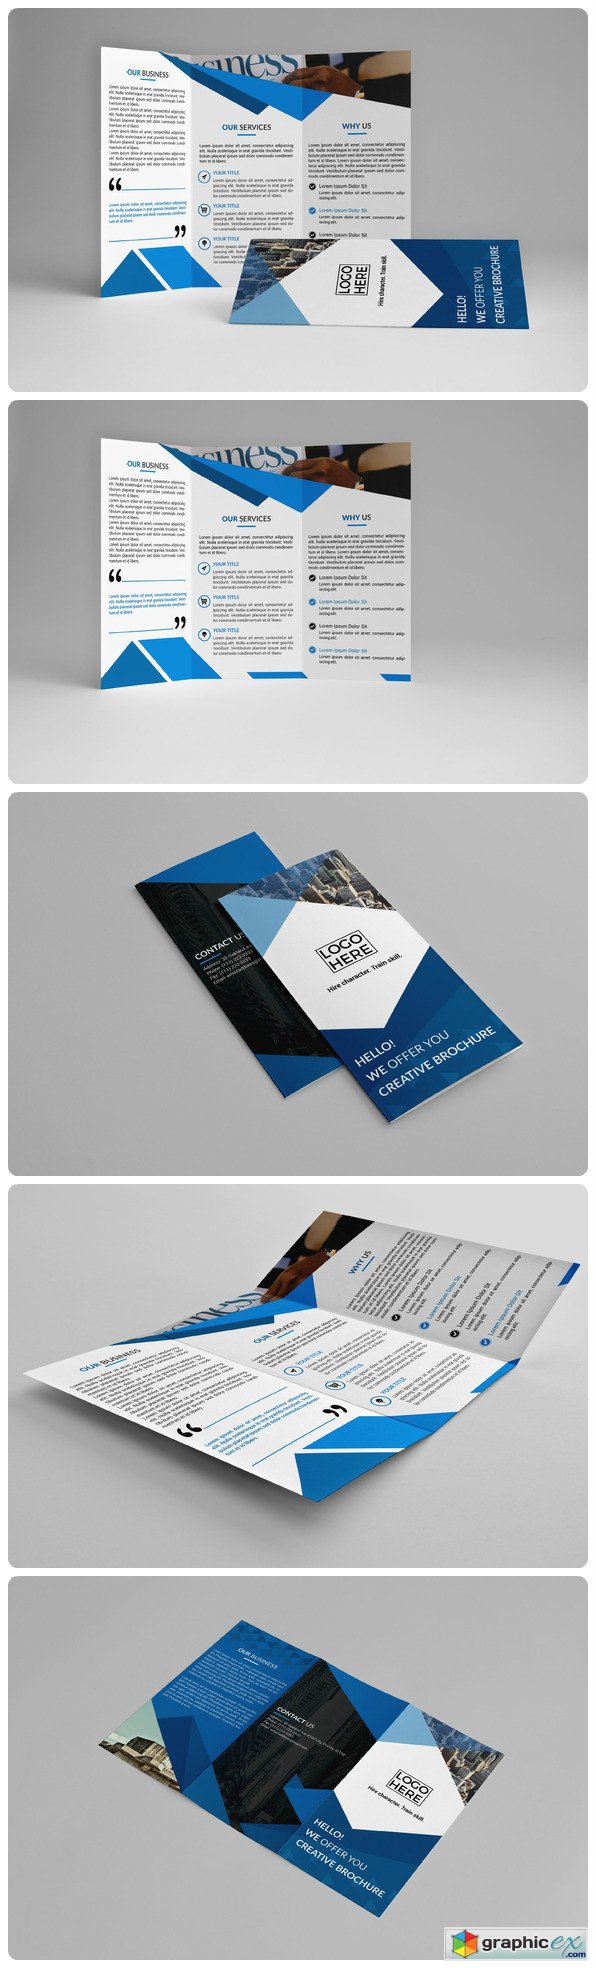 Business Trifold Brochure Template 624333